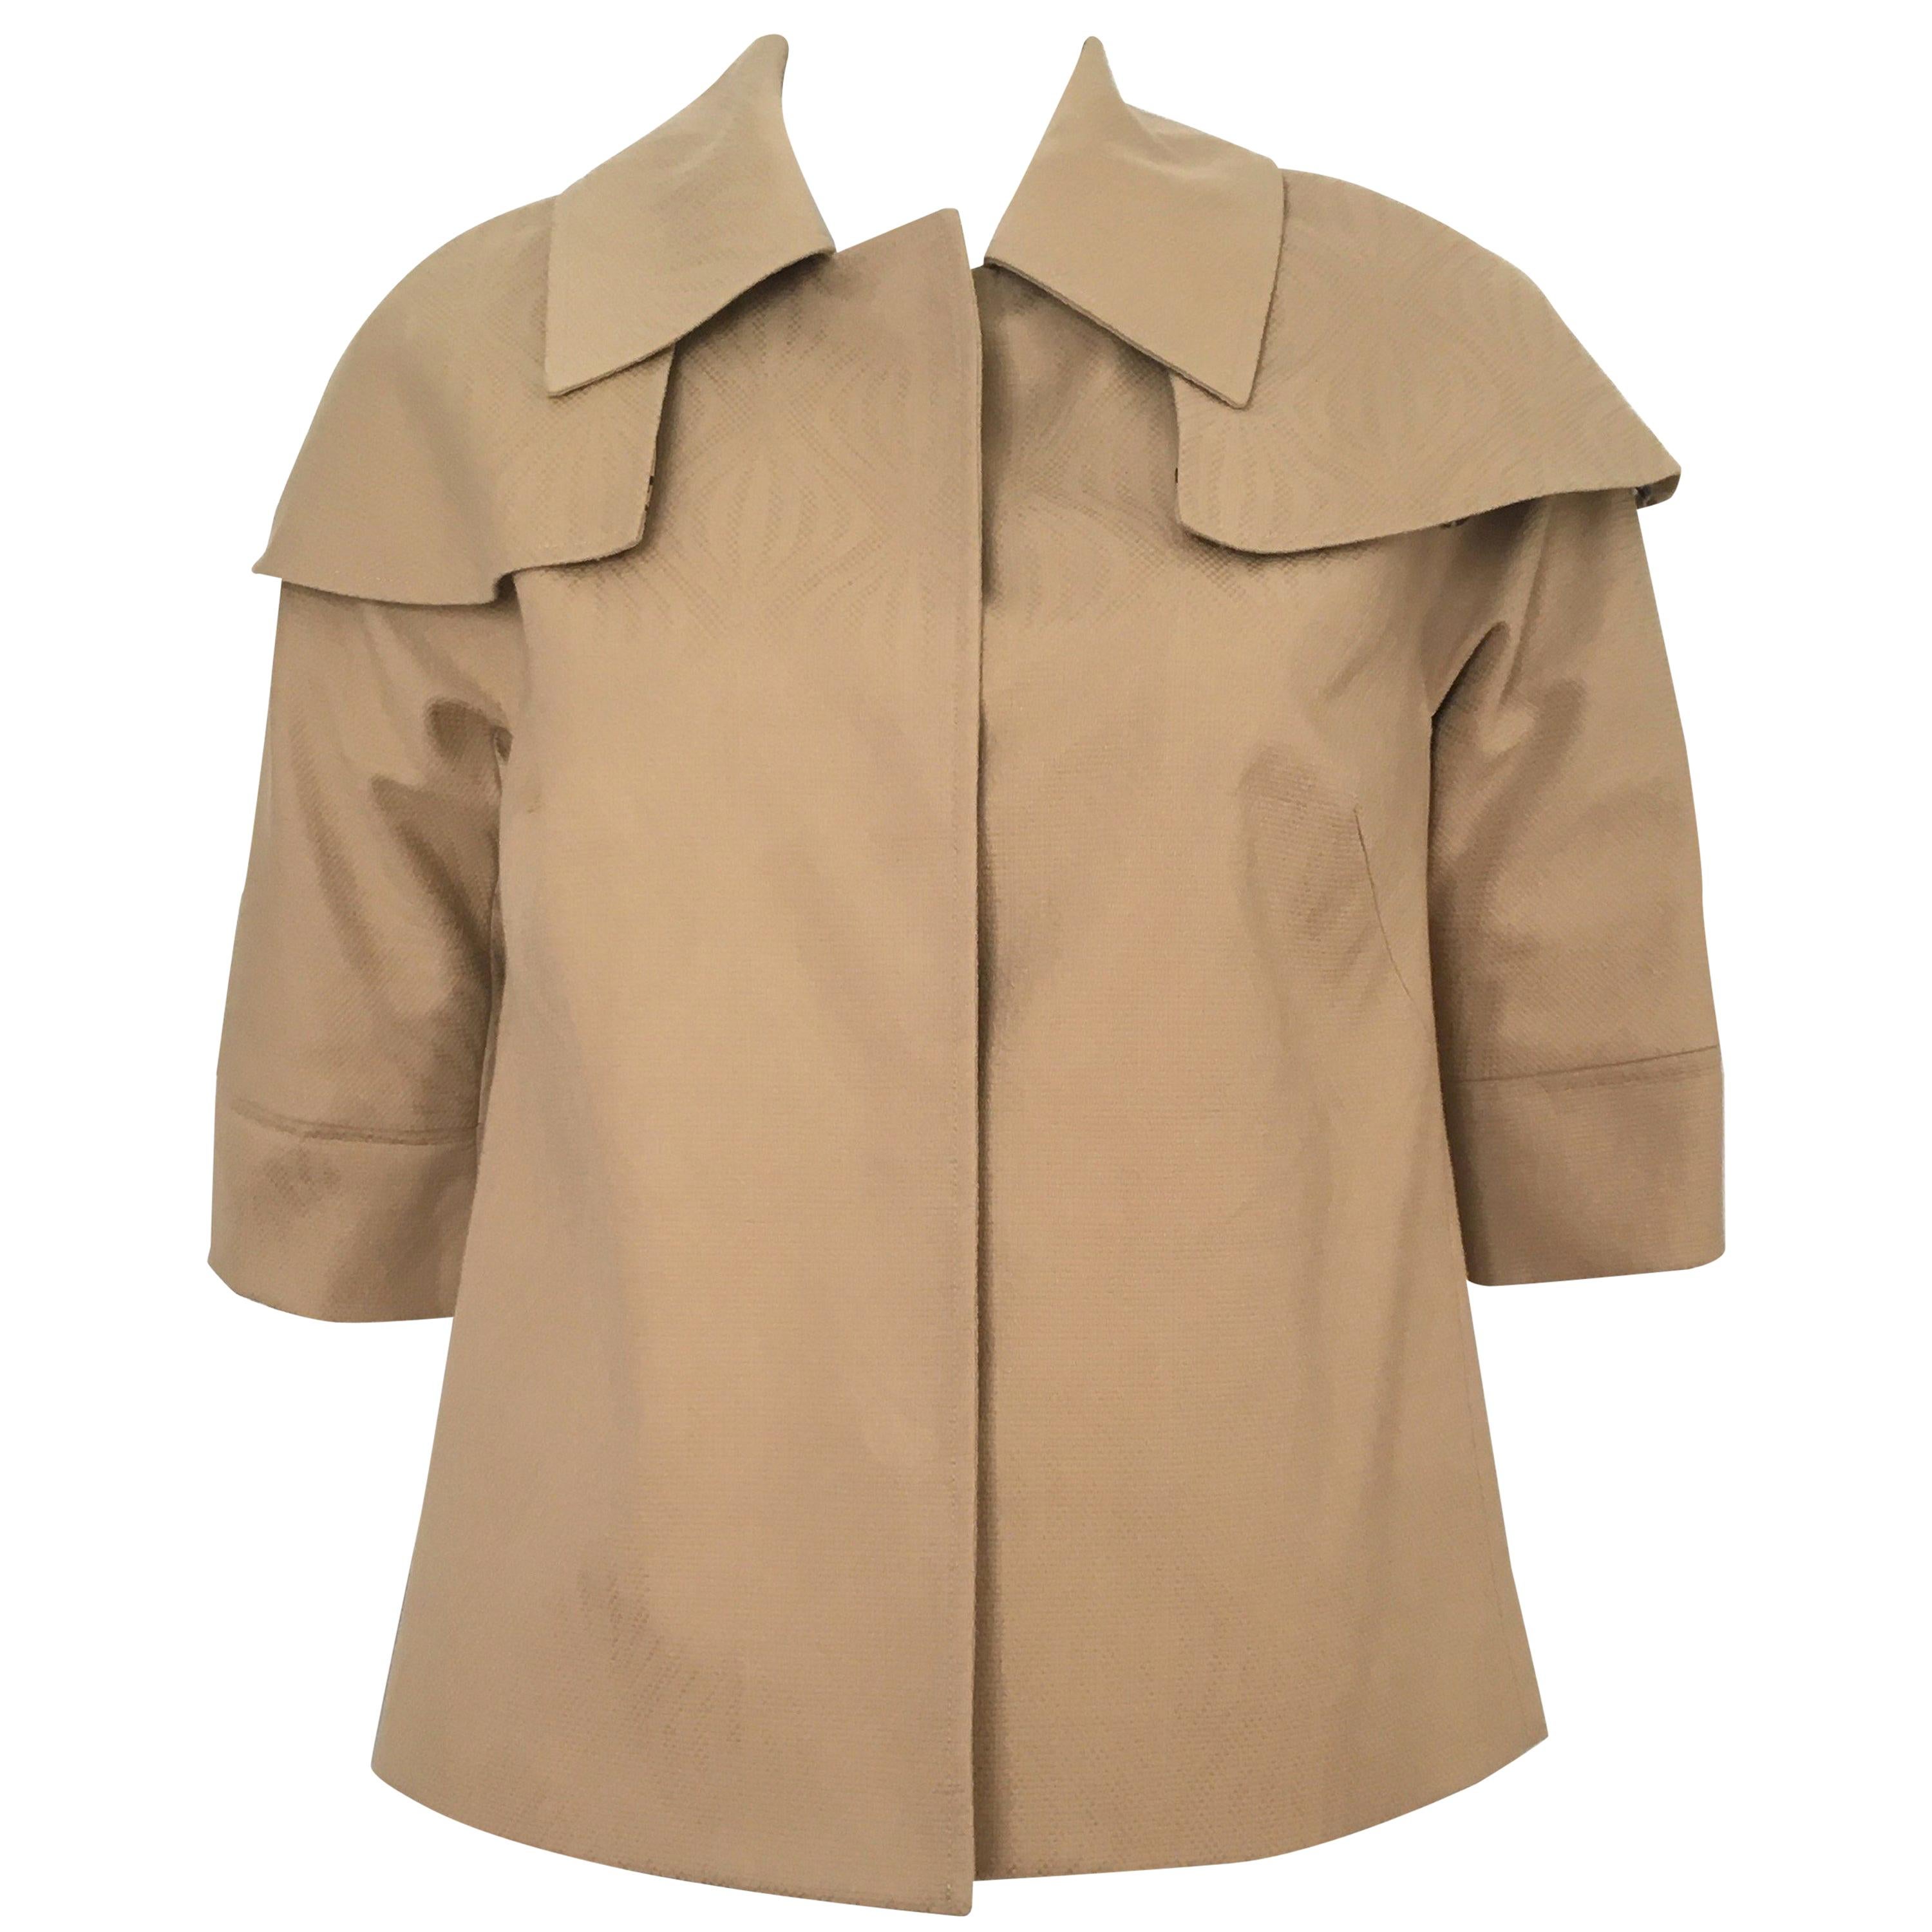 Lela Rose Tan Caped Swing Jacket Size 4. Never Worn. For Sale